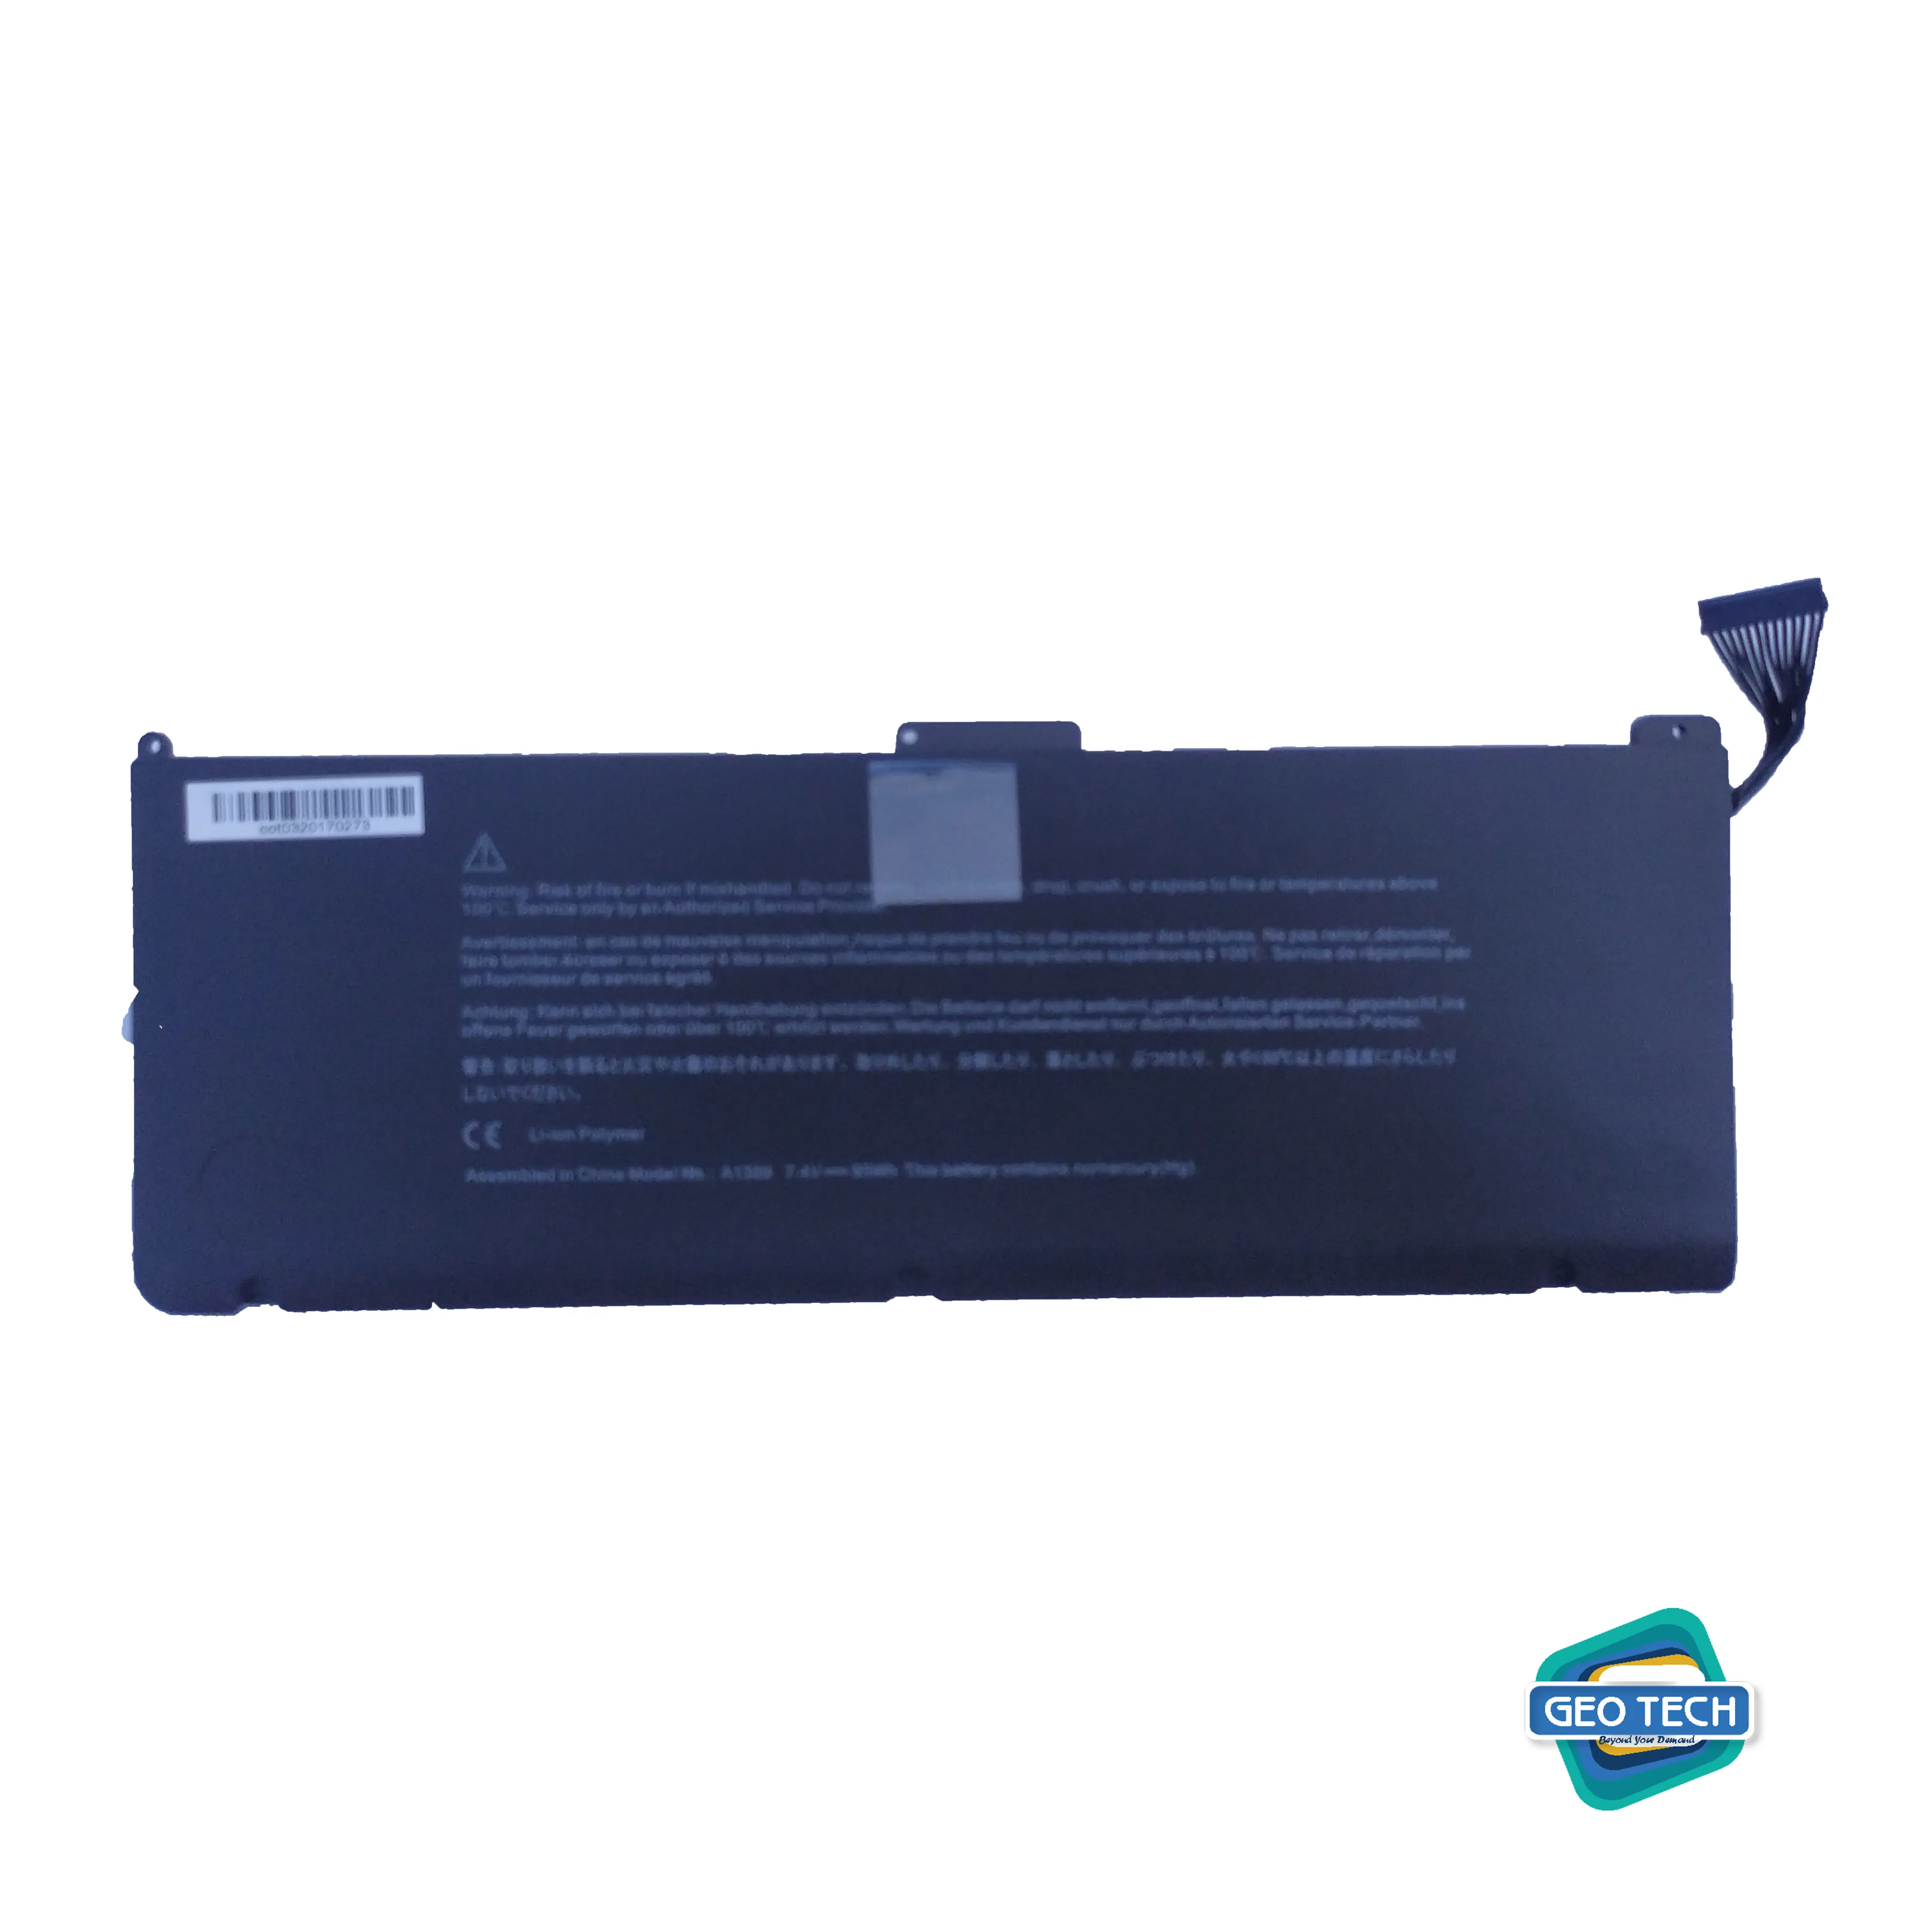 New A1309/ 1383 Laptop Battery Compatible for MacBook Pro 17" A1297 (Only fit Early 2009 Mid-2009 Mid-2010),fits MC226/A MC226CH/A MC226J/A 020-6313-C 661-5037-A